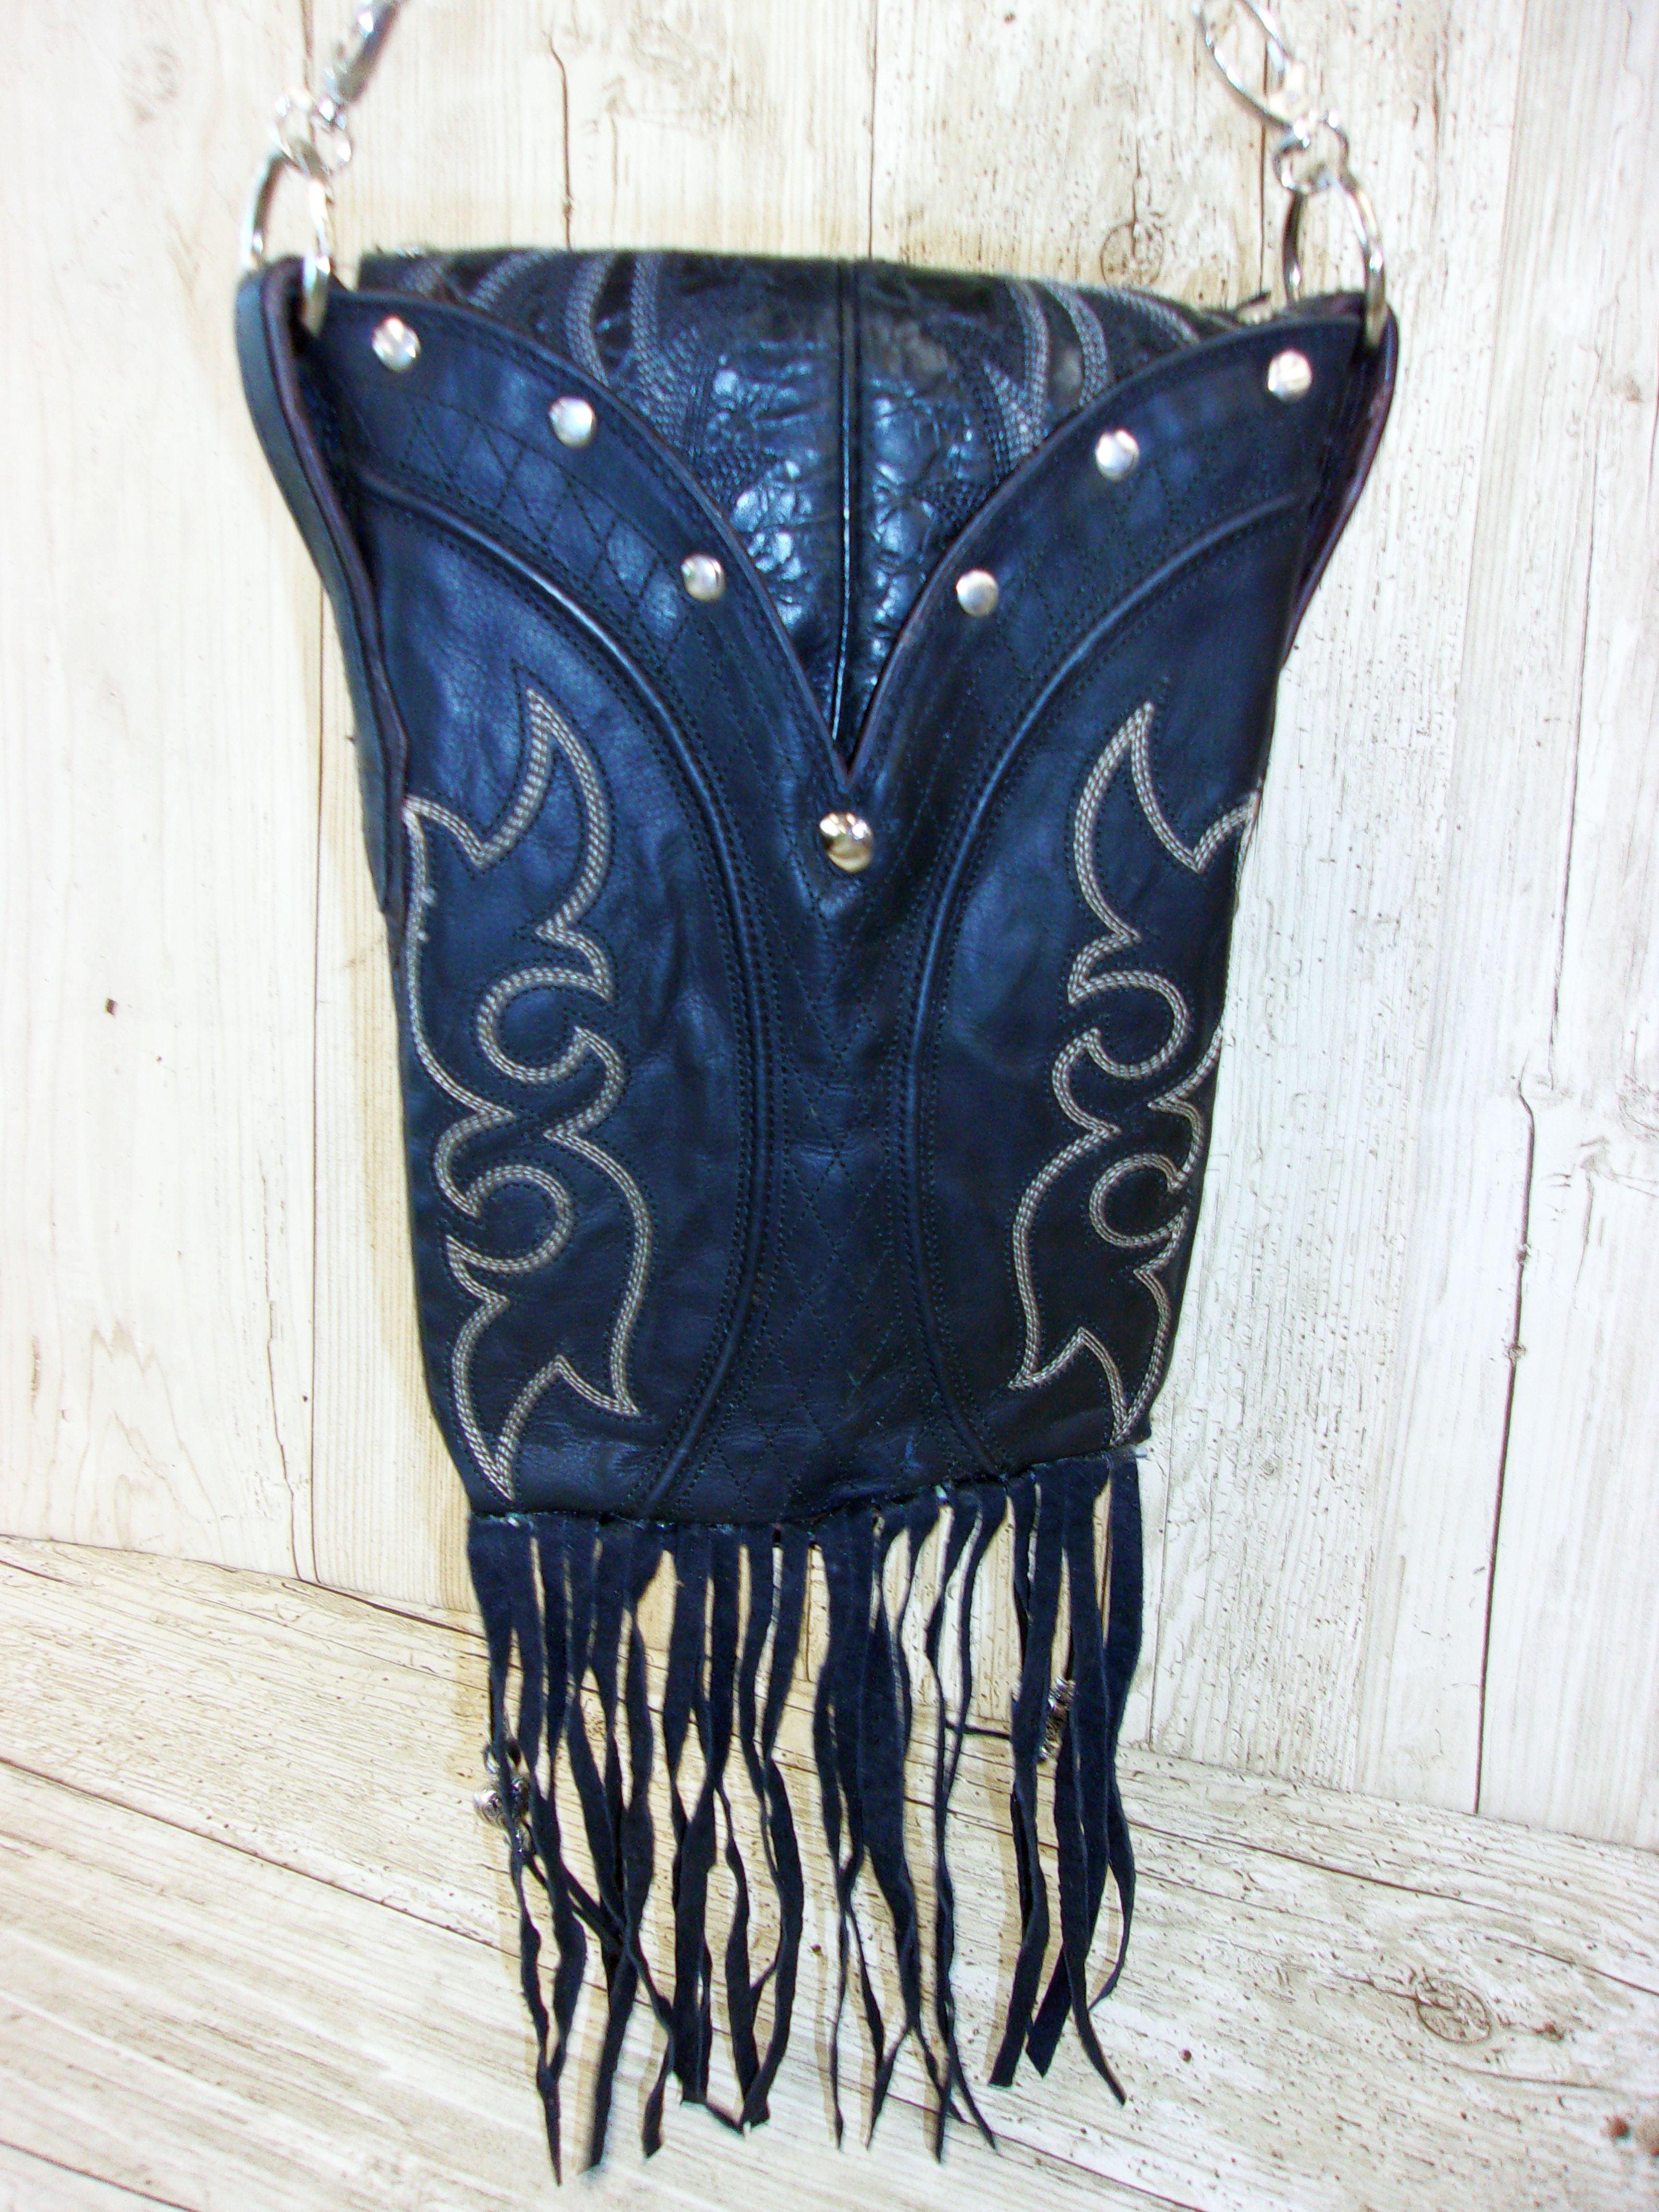 Crossbody Purse with Fringe – Crossbody Hipster Purse - Cowboy Boot Purse – Western Hipster HP930 cowboy boot purses, western fringe purse, handmade leather purses, boot purse, handmade western purse, custom leather handbags Chris Thompson Bags